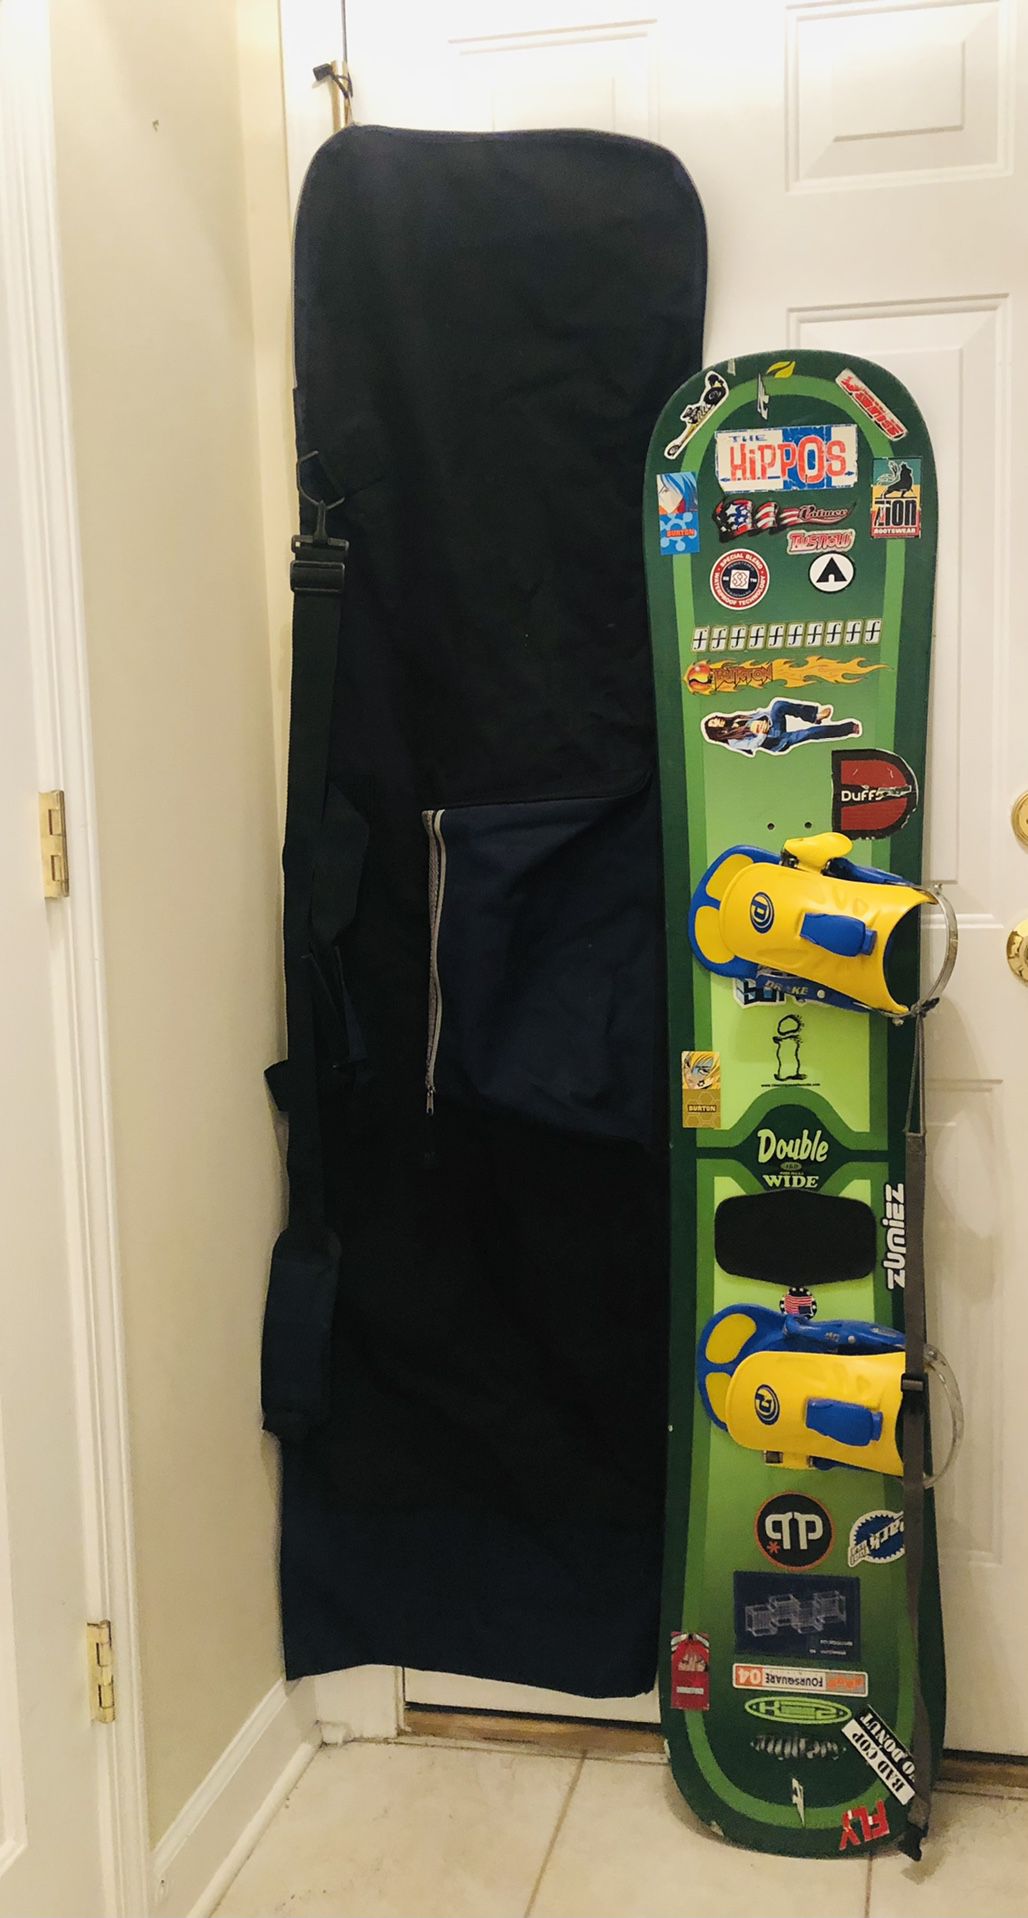 K2 Double Wide 160 Snowboard & Bag - will remove stickers upon request